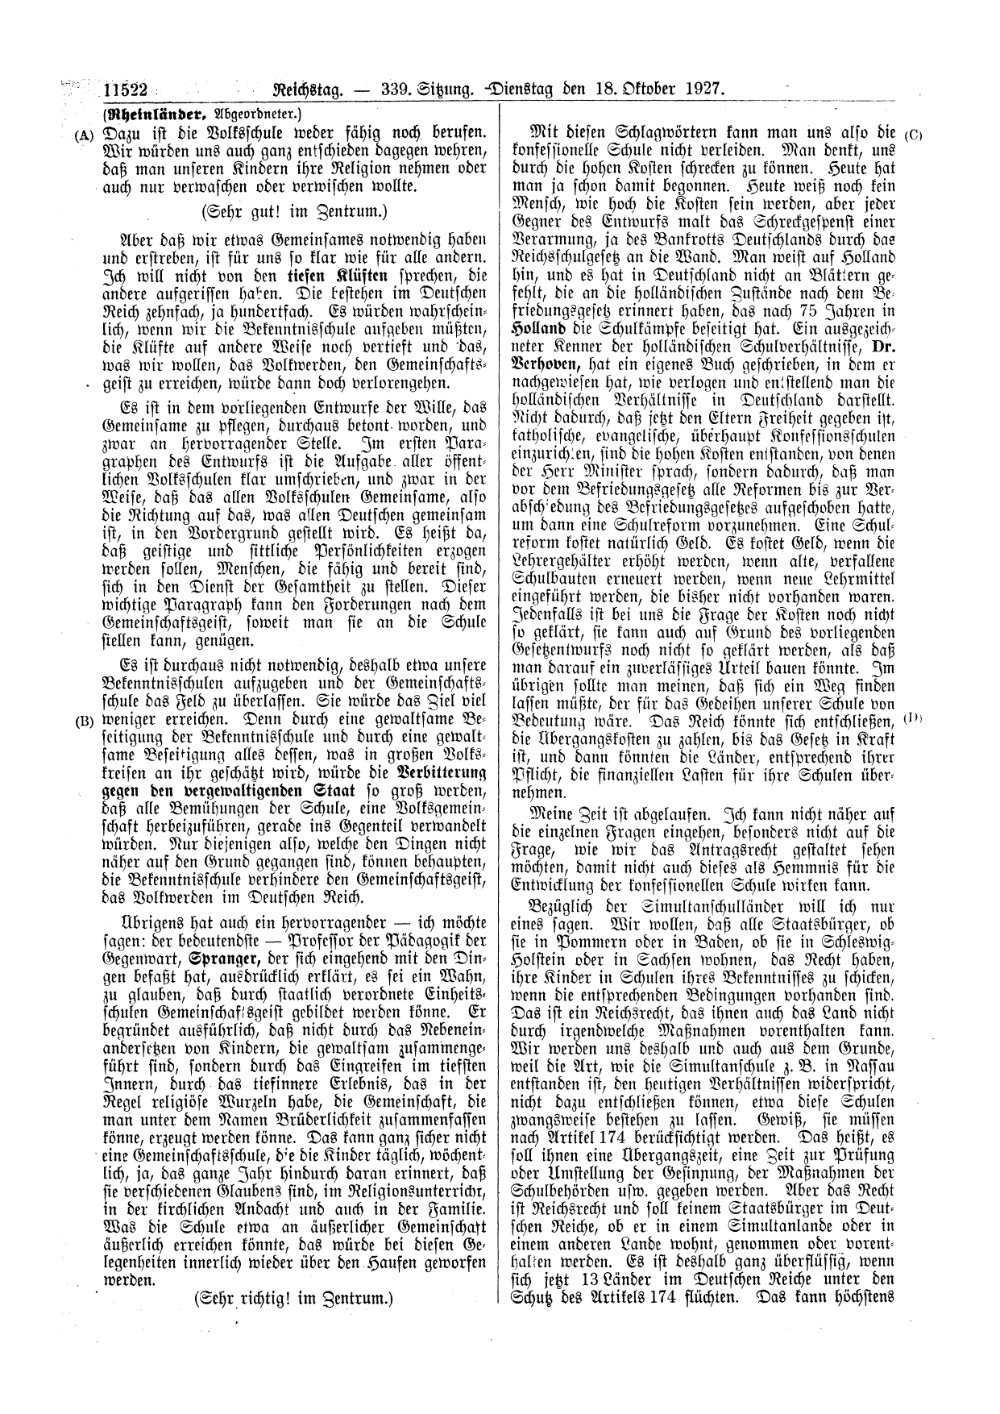 Scan of page 11522